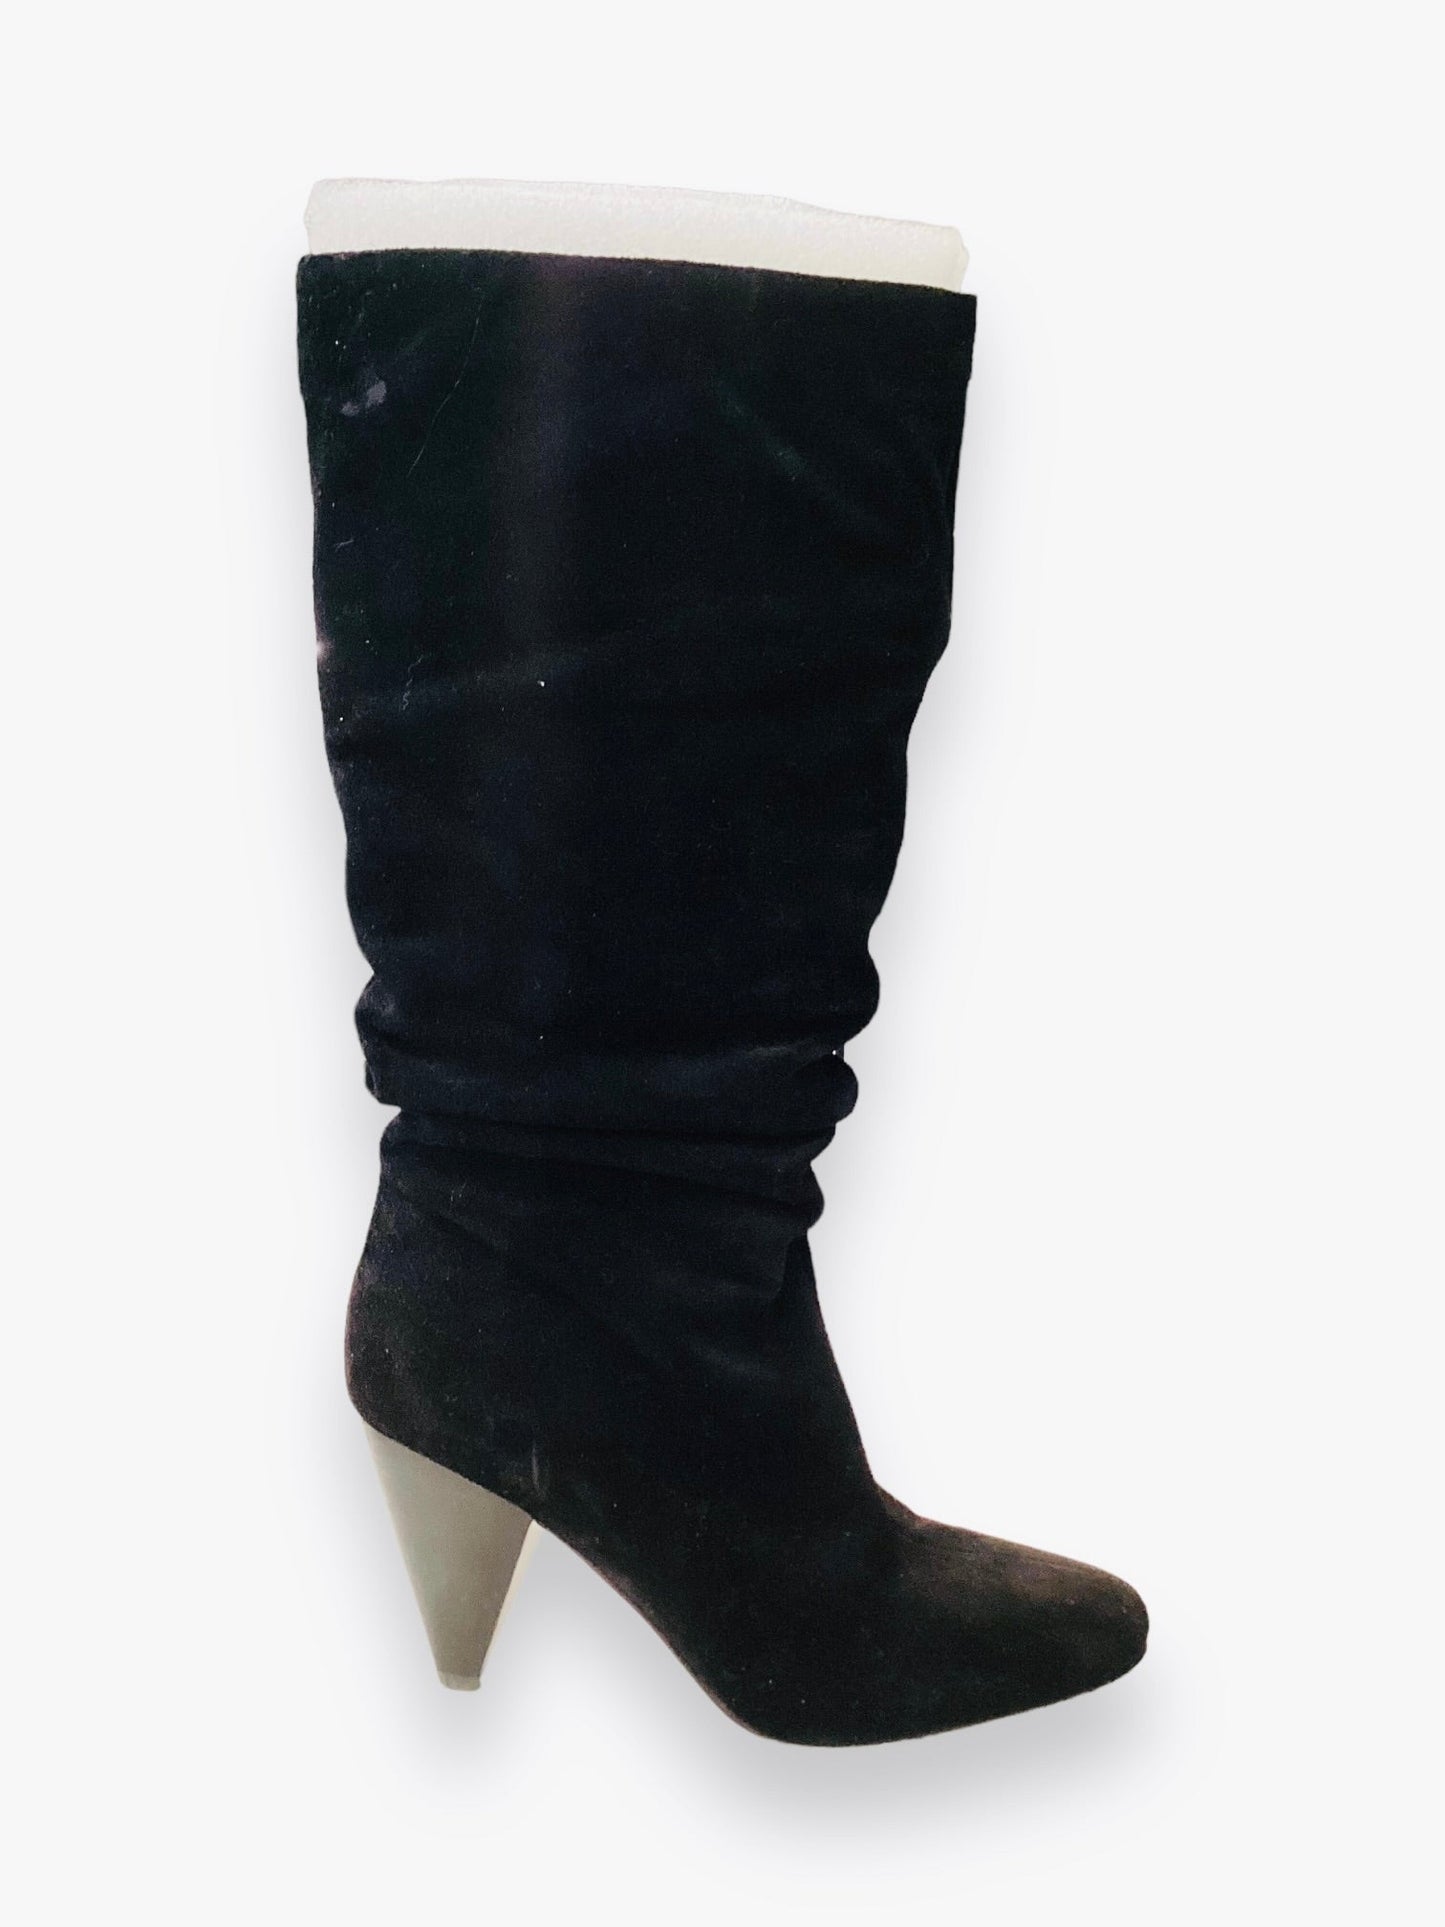 Black Boots Knee Heels Vince Camuto, Size 8